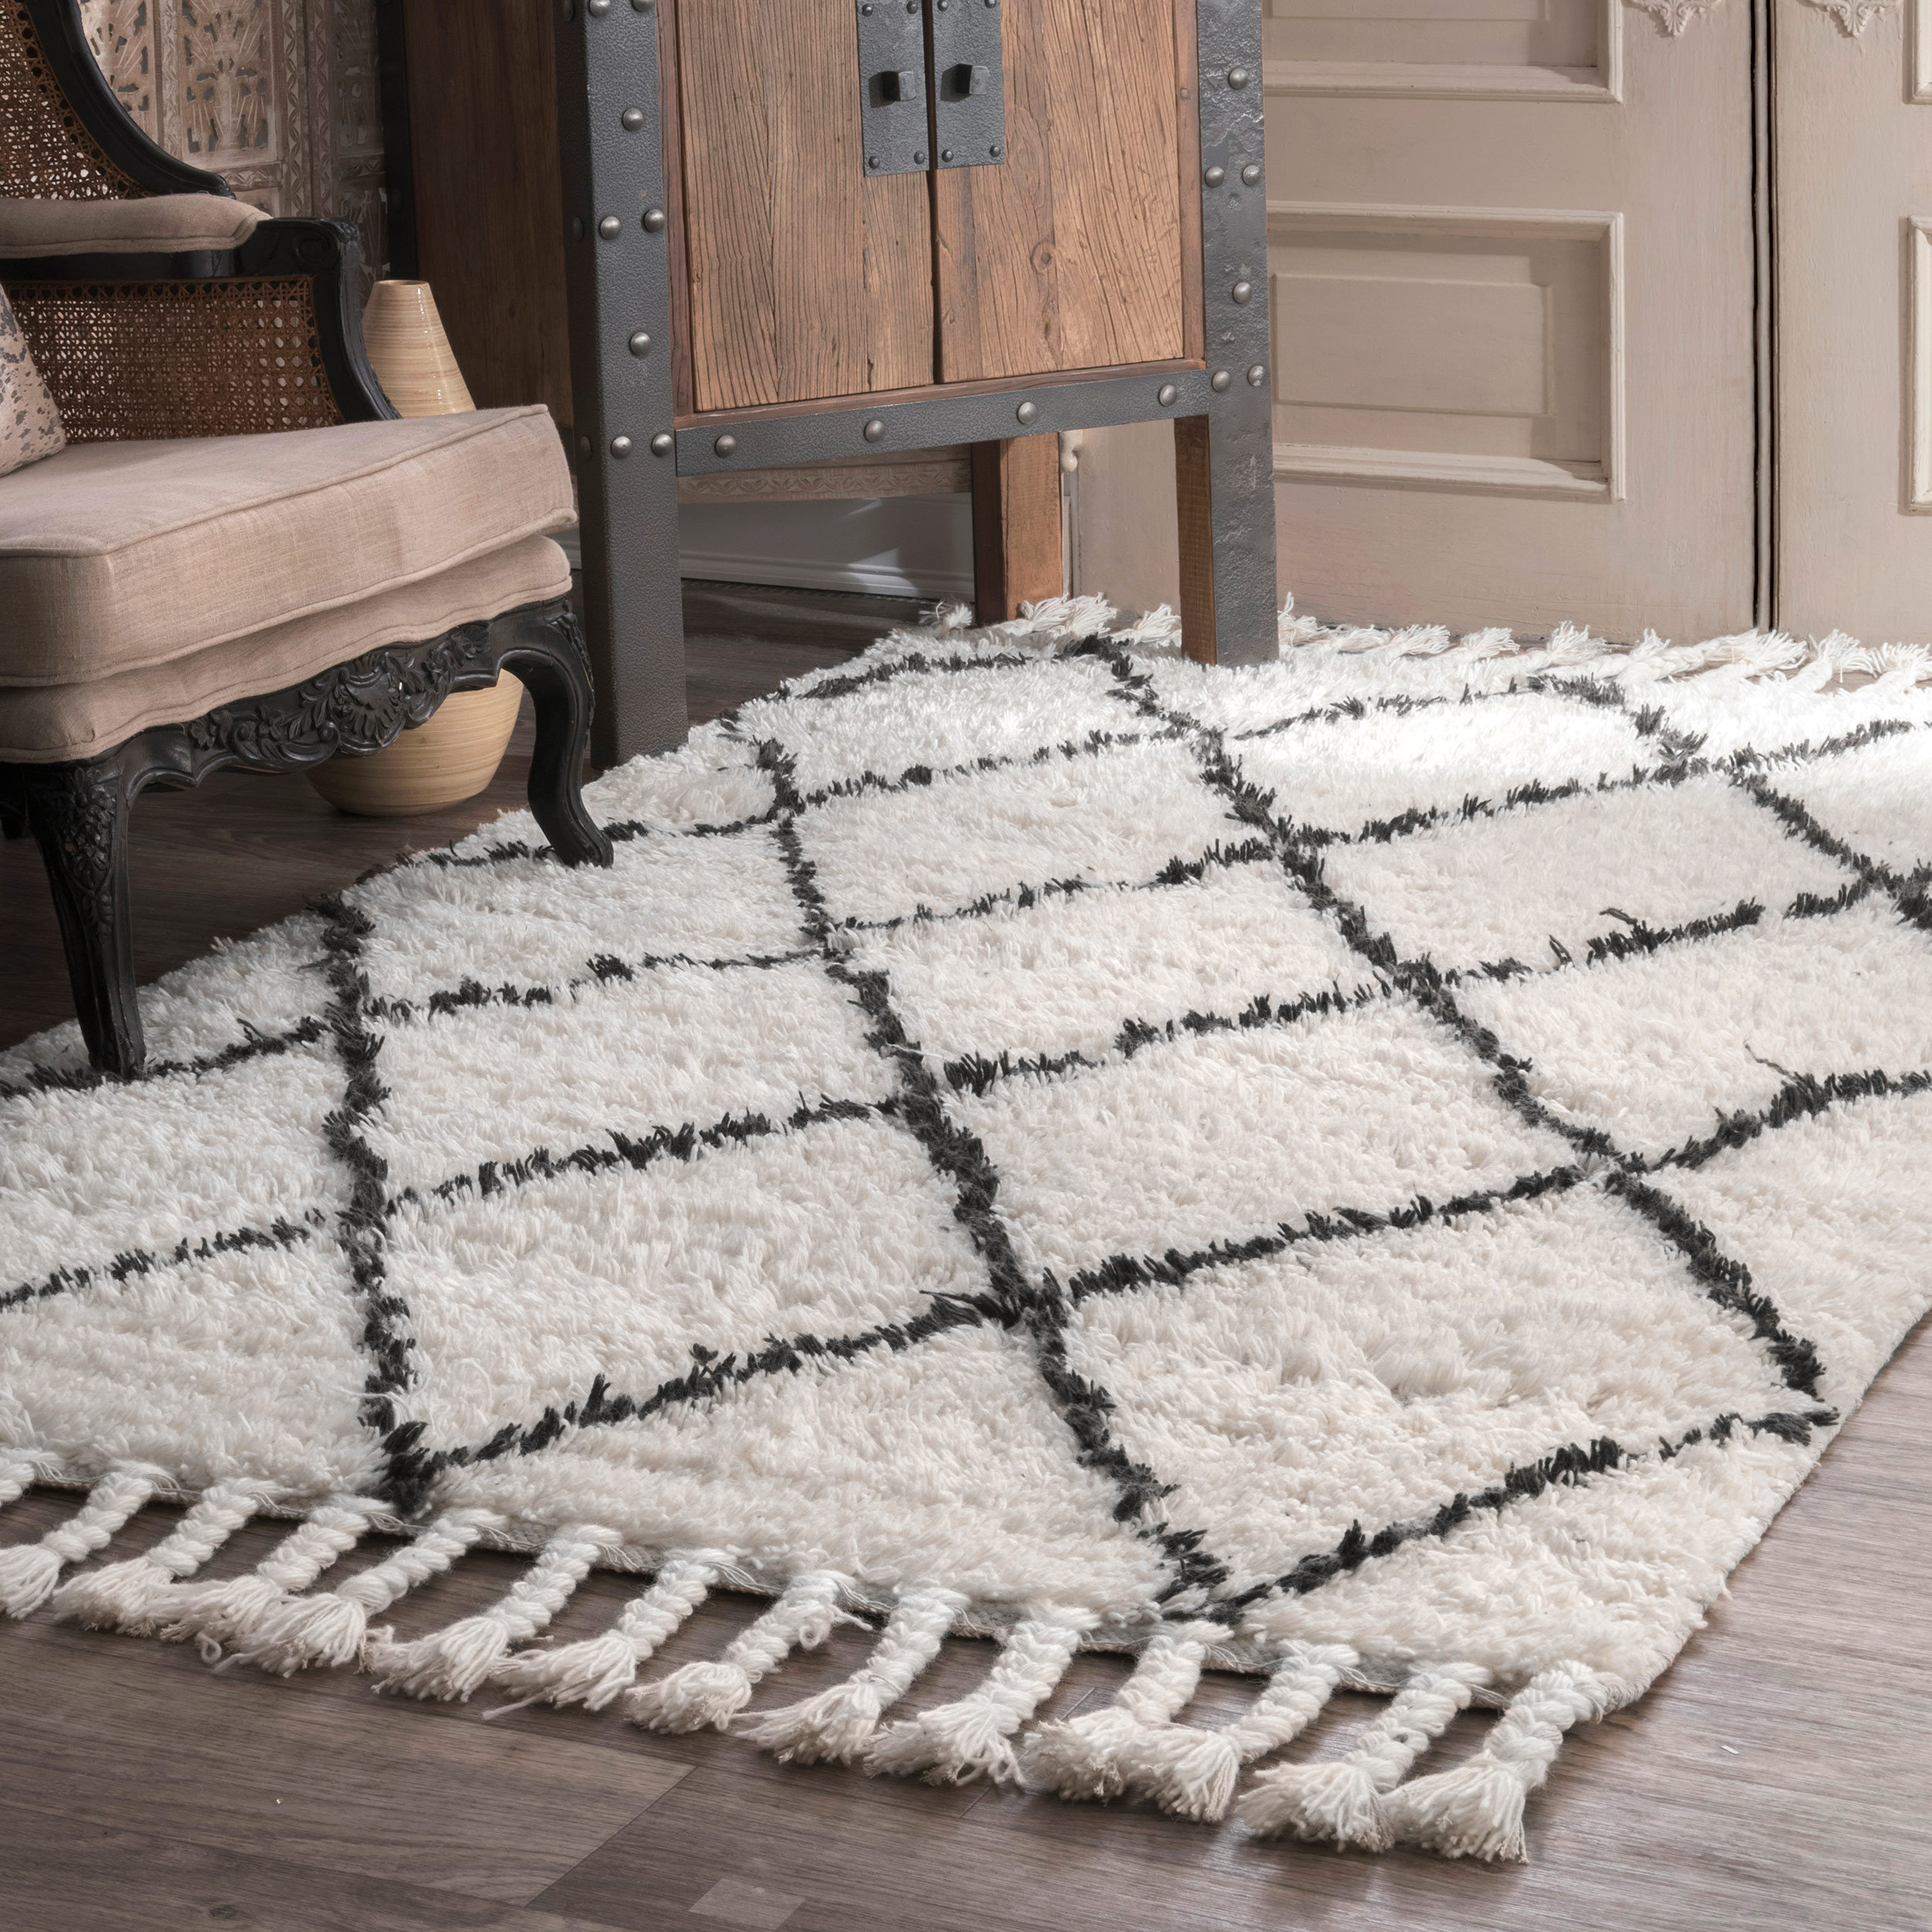 How To Choose The Best Rug Material Wayfair